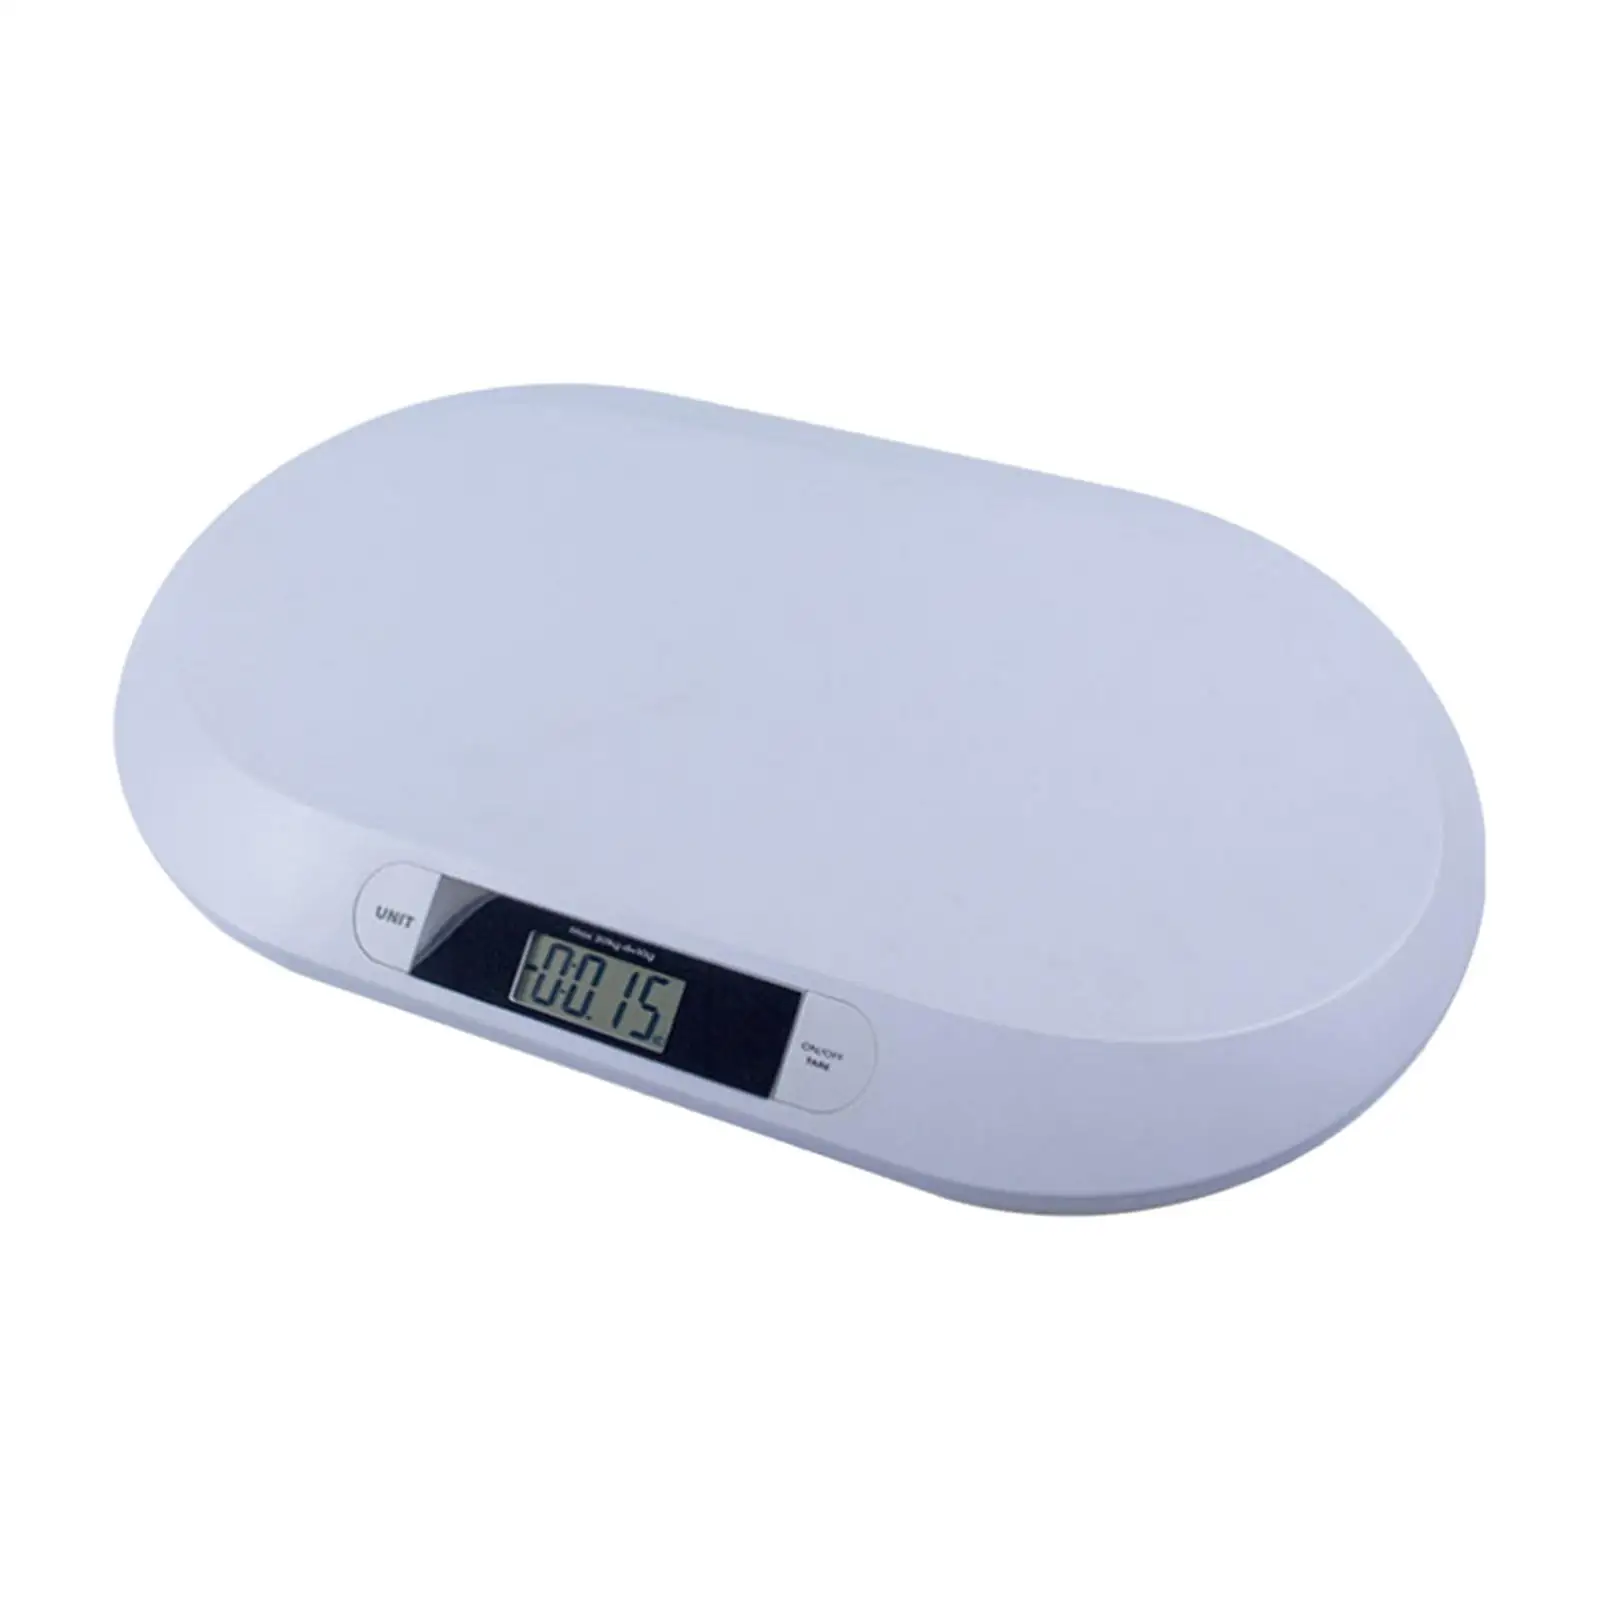 Scale .1lb Multifunction Health Scale for Toddlers Puppy Animals